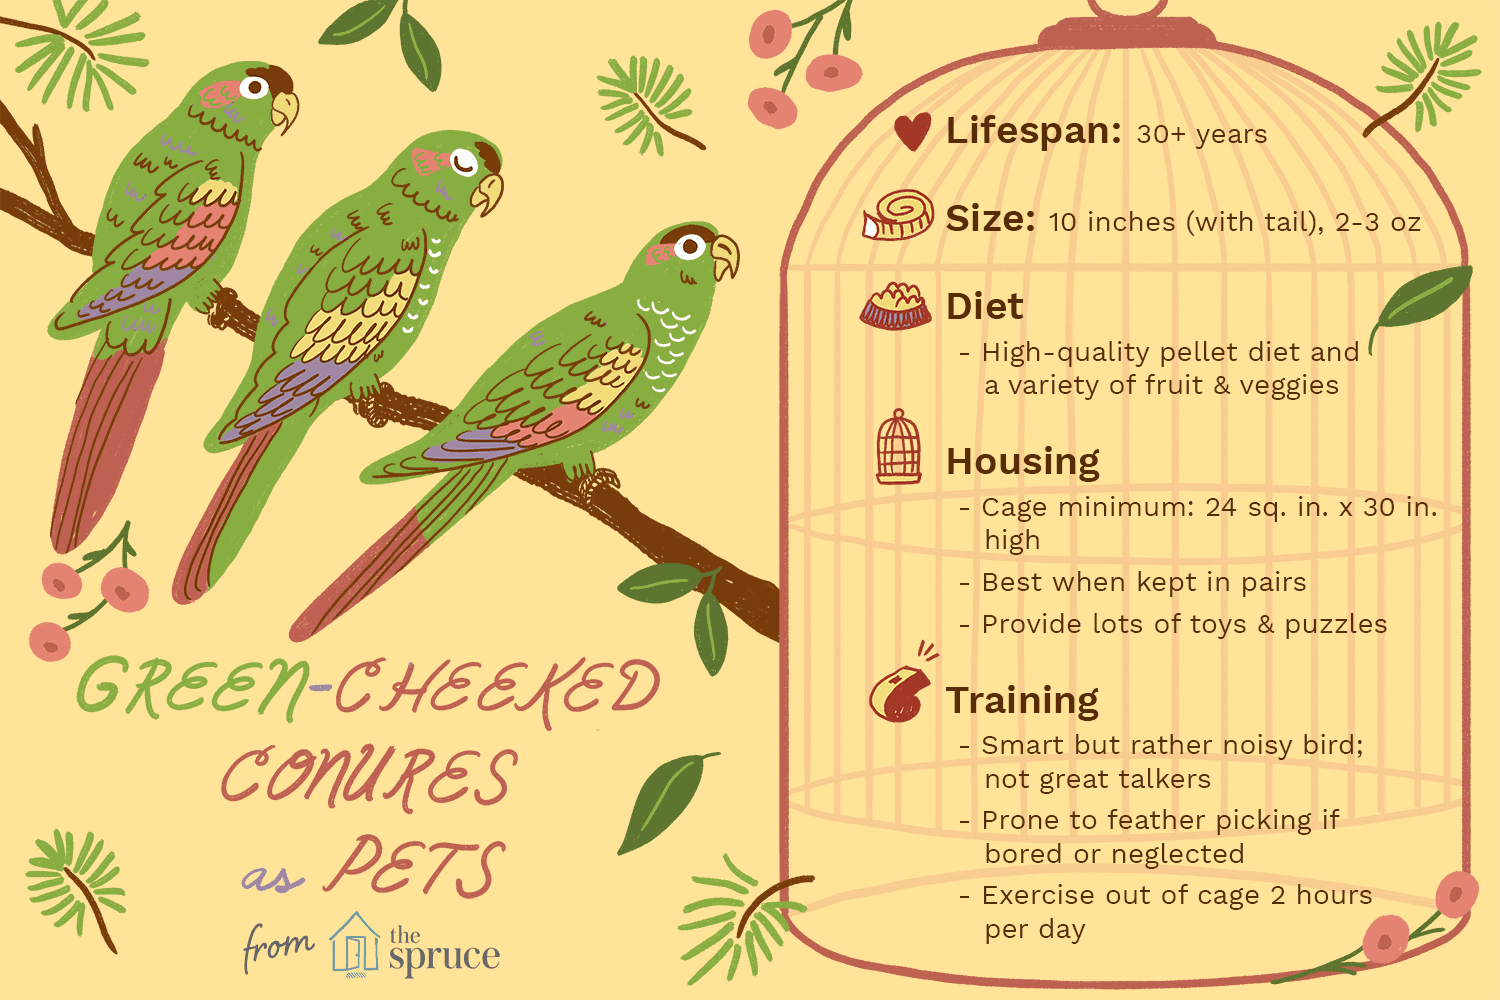 Illustration of green cheeked conures as pets